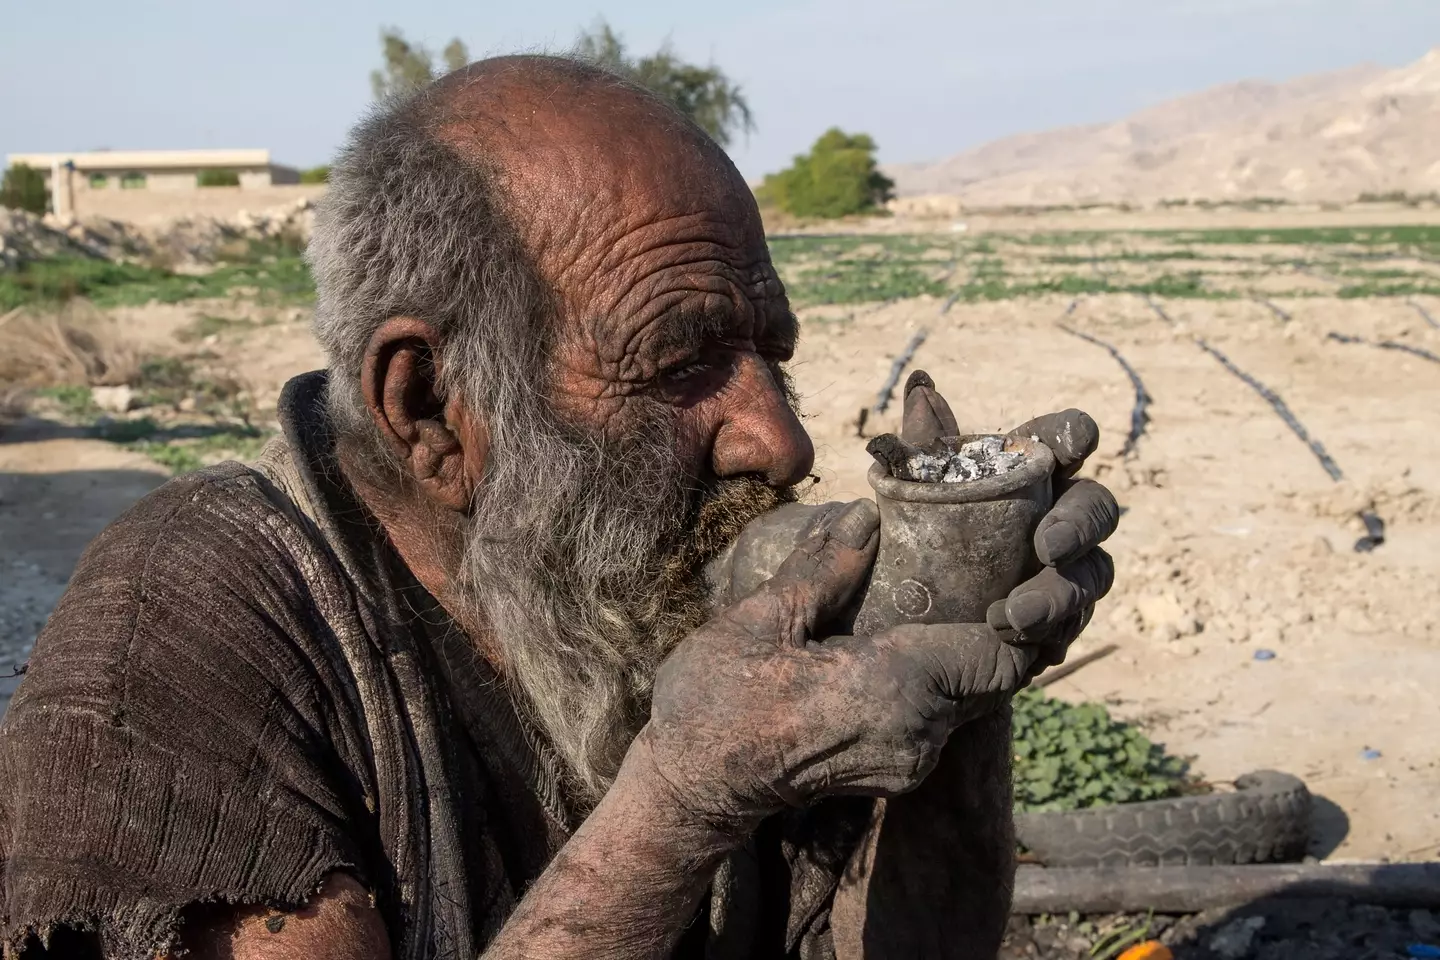 Amou Haji was dubbed the world's dirtiest man after going more than 60 years without a wash. (AFP via Getty Images)